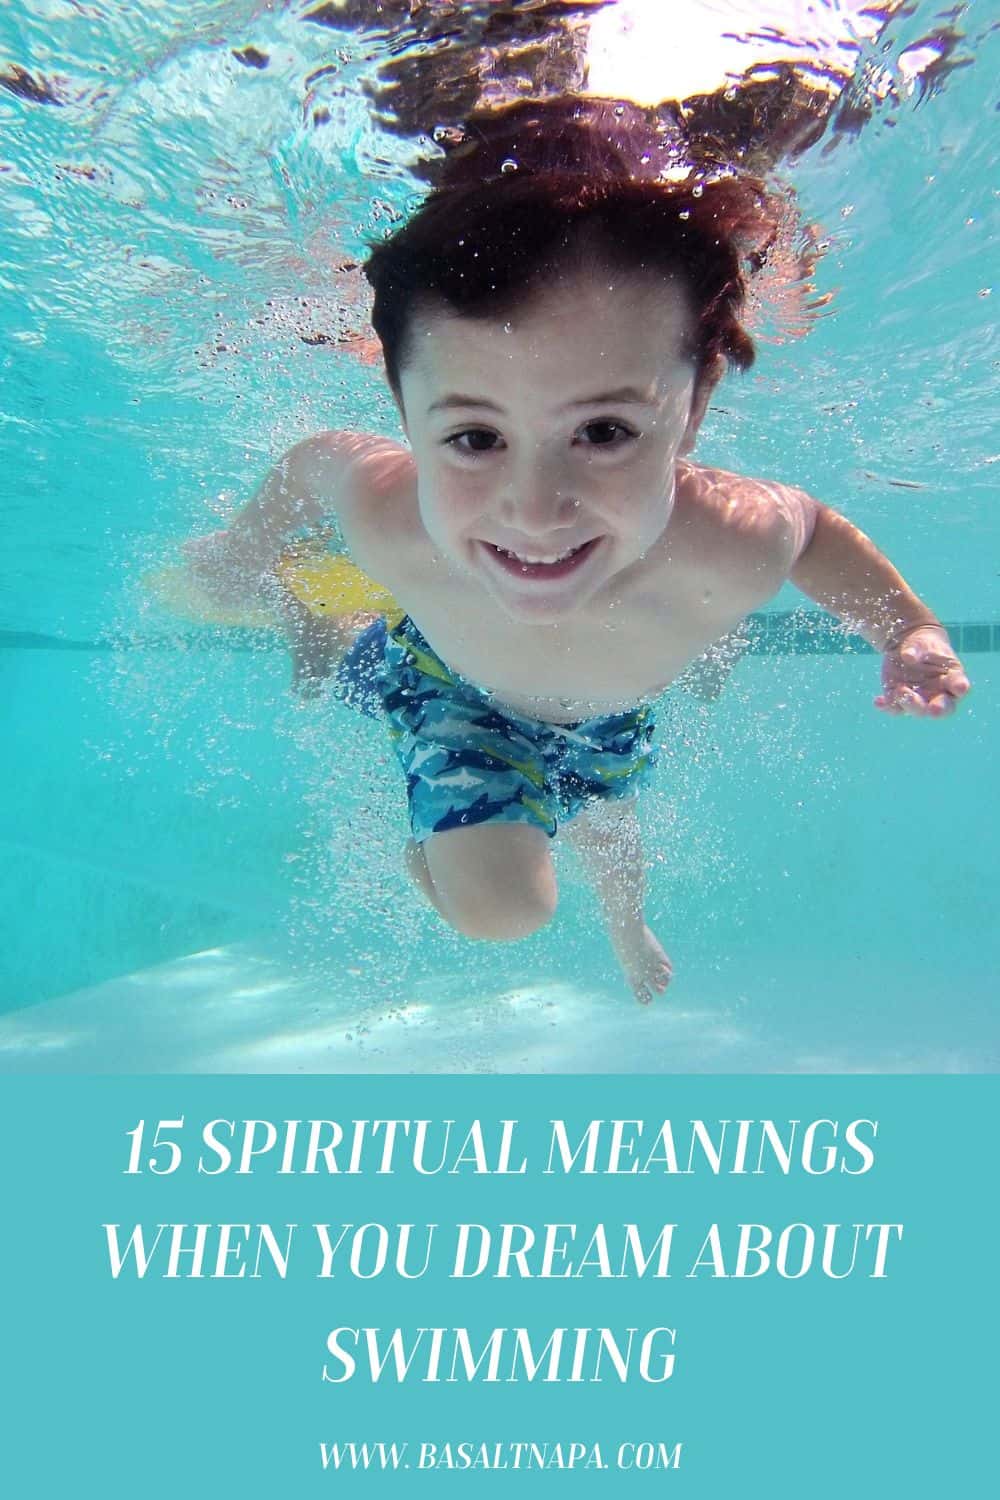 15 Spiritual Meanings When You Dream About Swimming